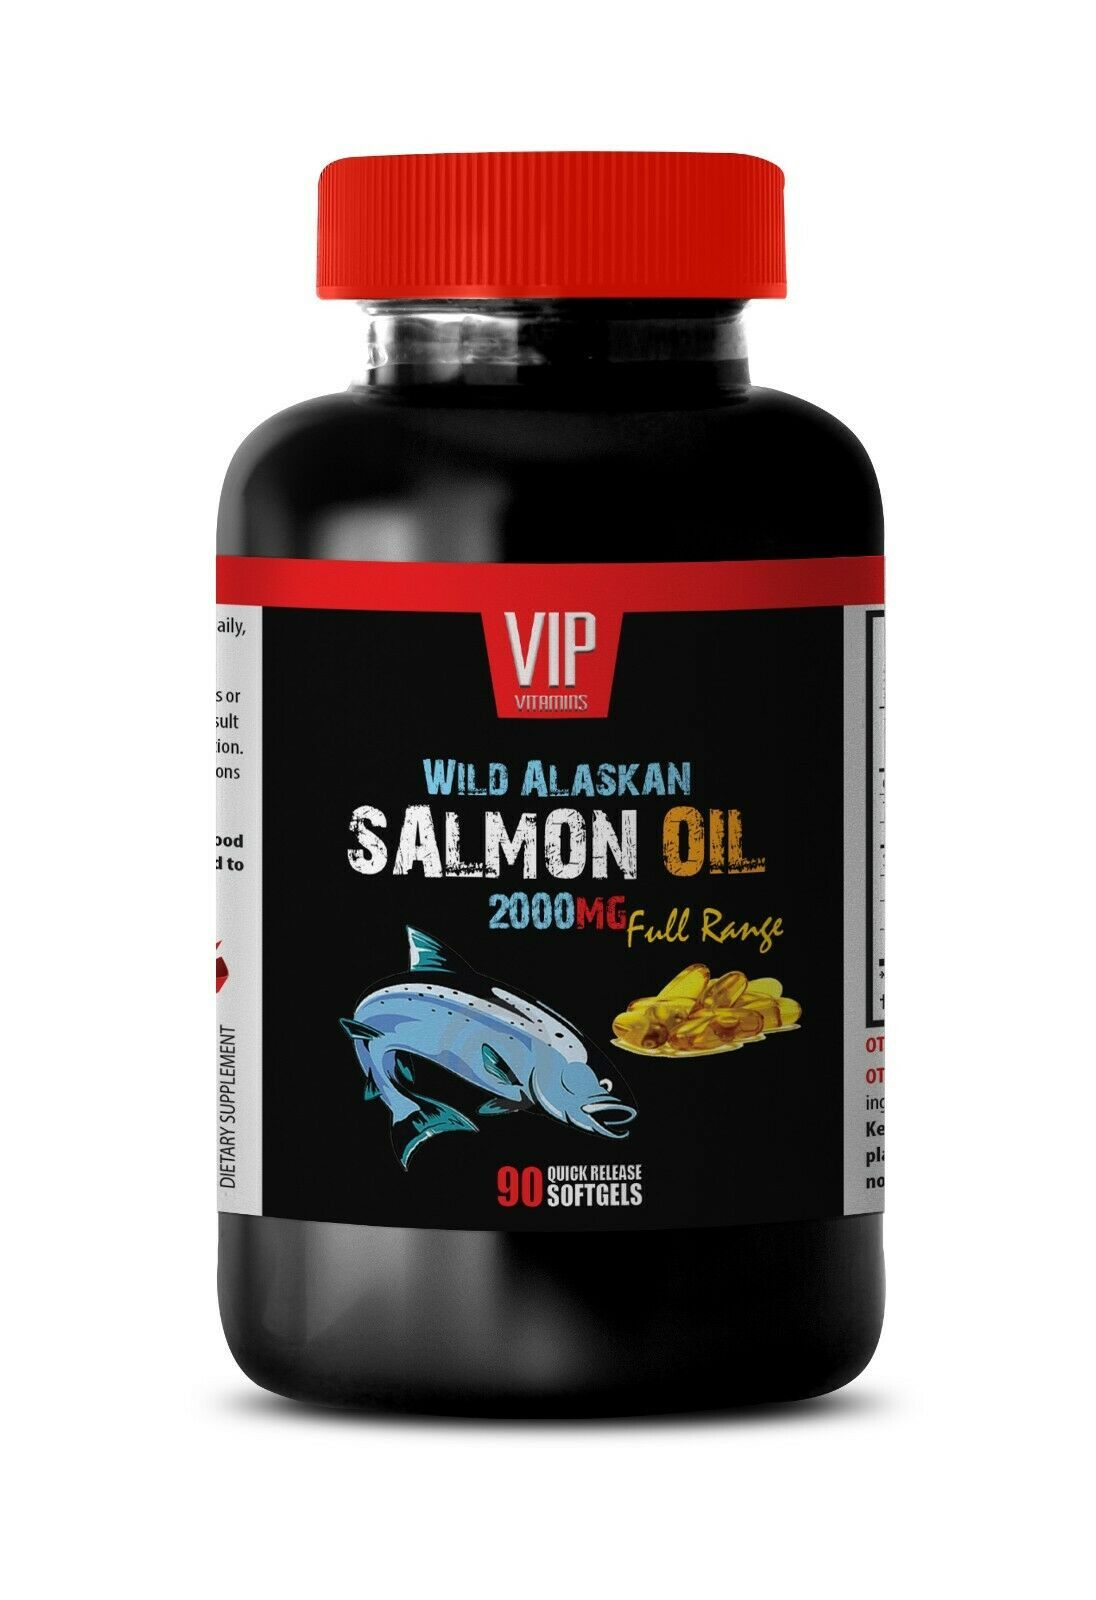 Primary image for naturally lower cholesterol - ALASKAN SALMON OIL 2000 - neuroprotective 1B 90